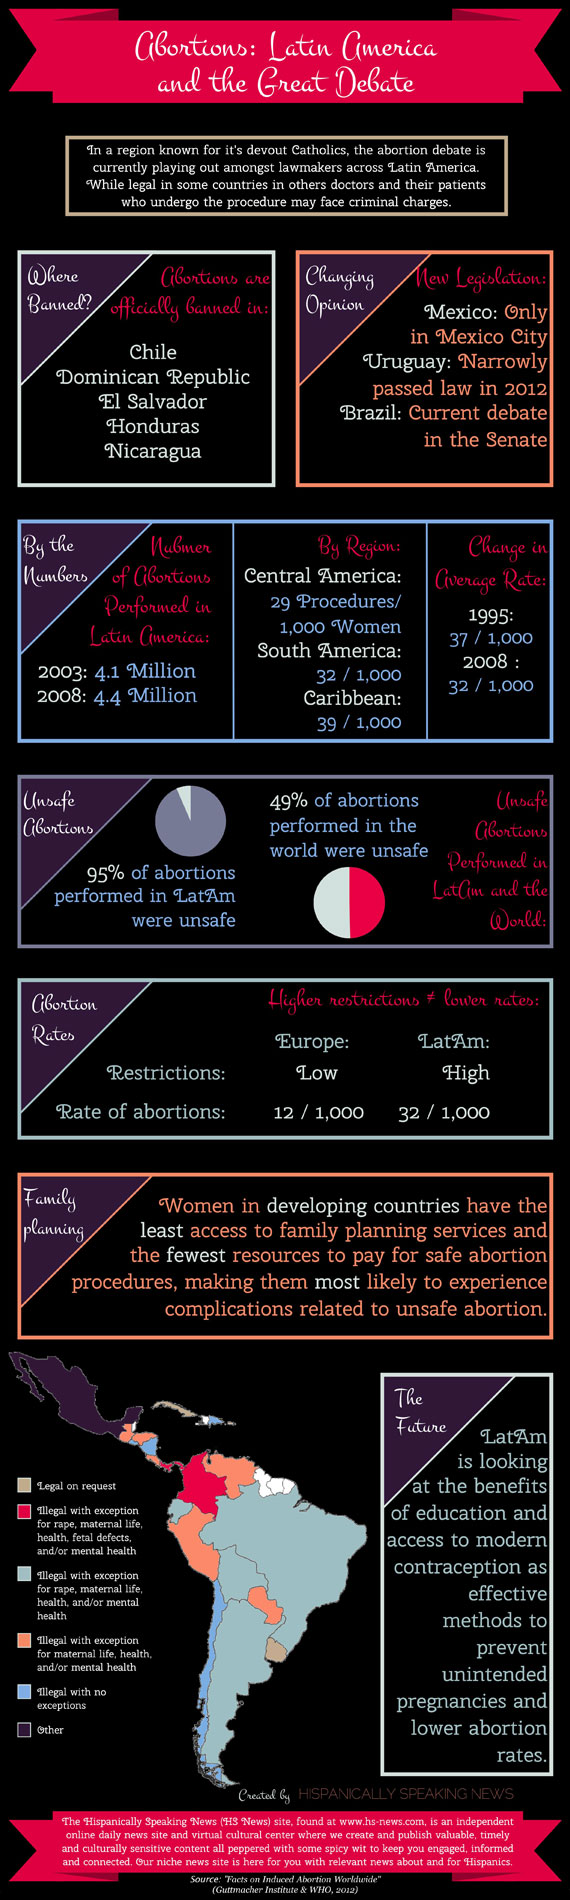 9. Abortions Latin America and the Great Debate